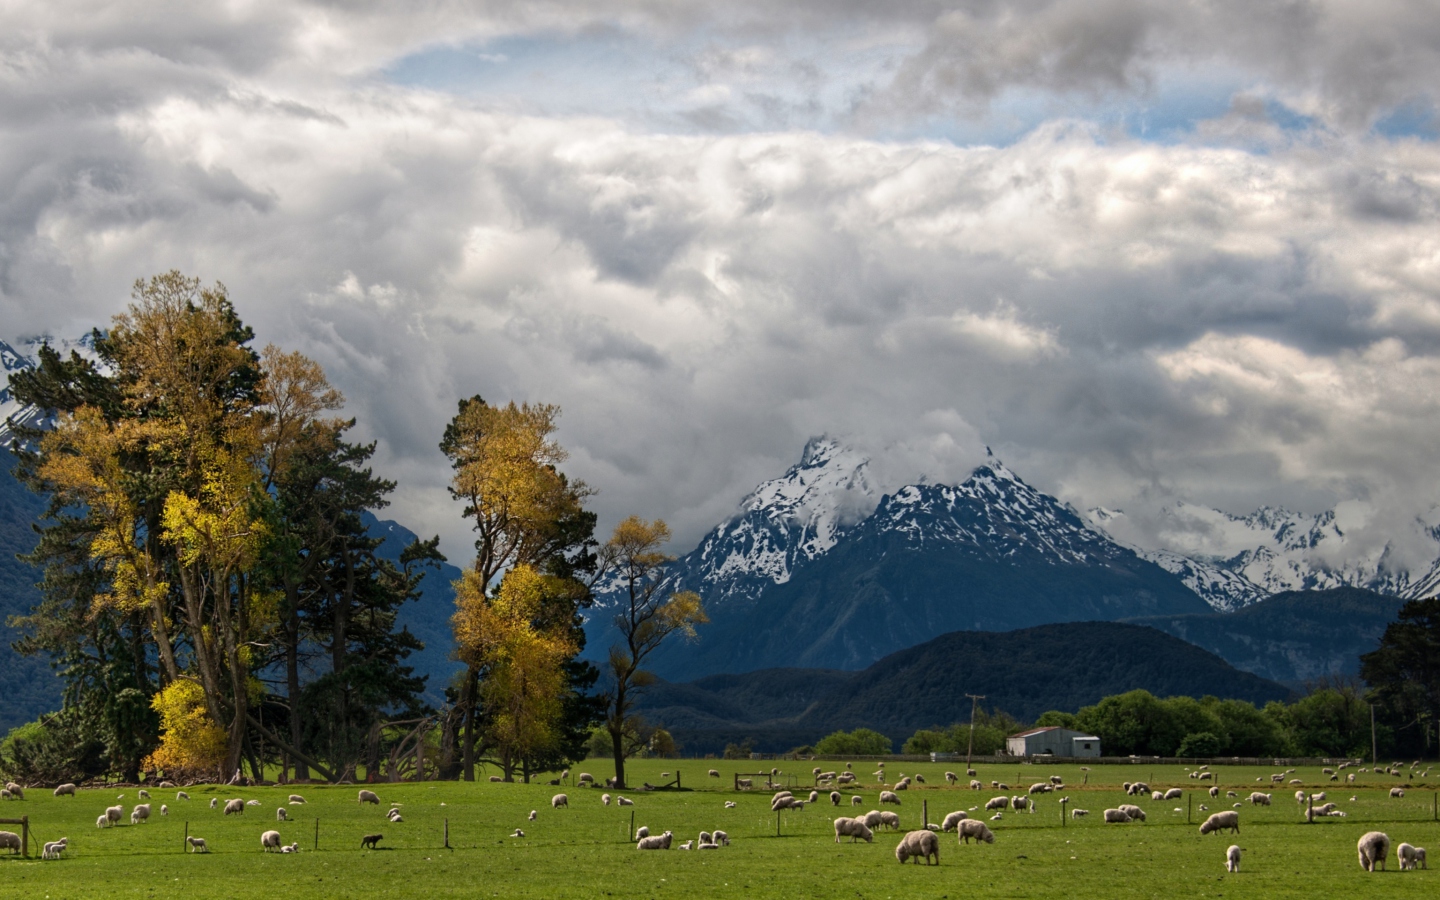 Das Sheeps On Green Field And Mountain View Wallpaper 1440x900